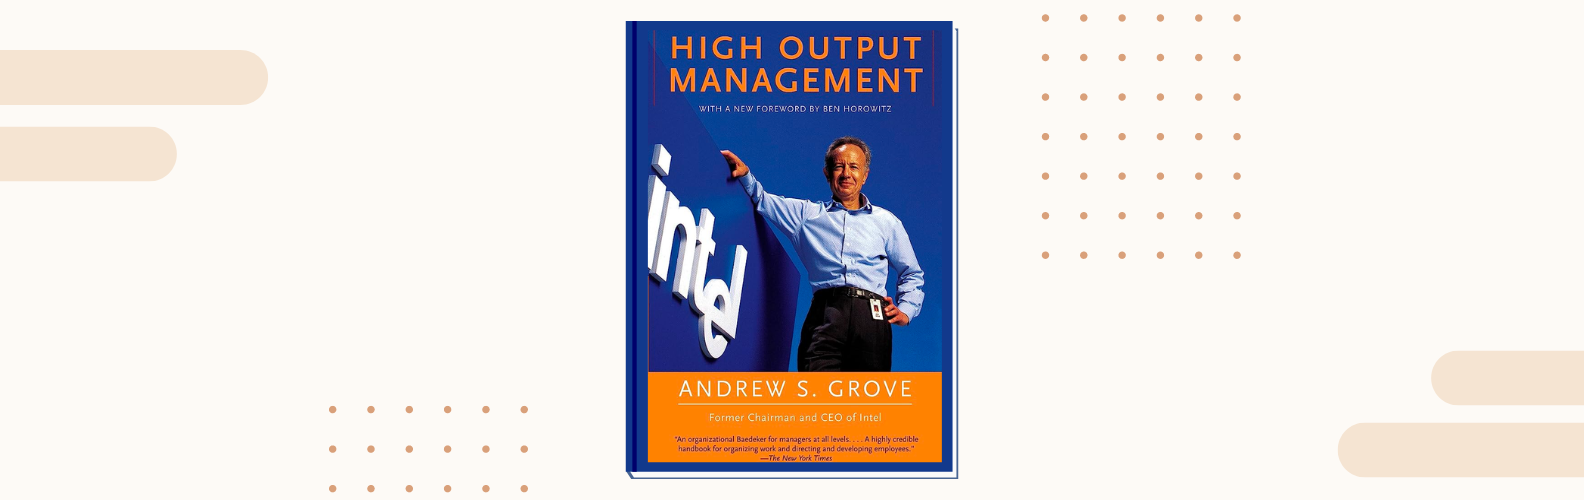 Cover of the book High output management - Popwork